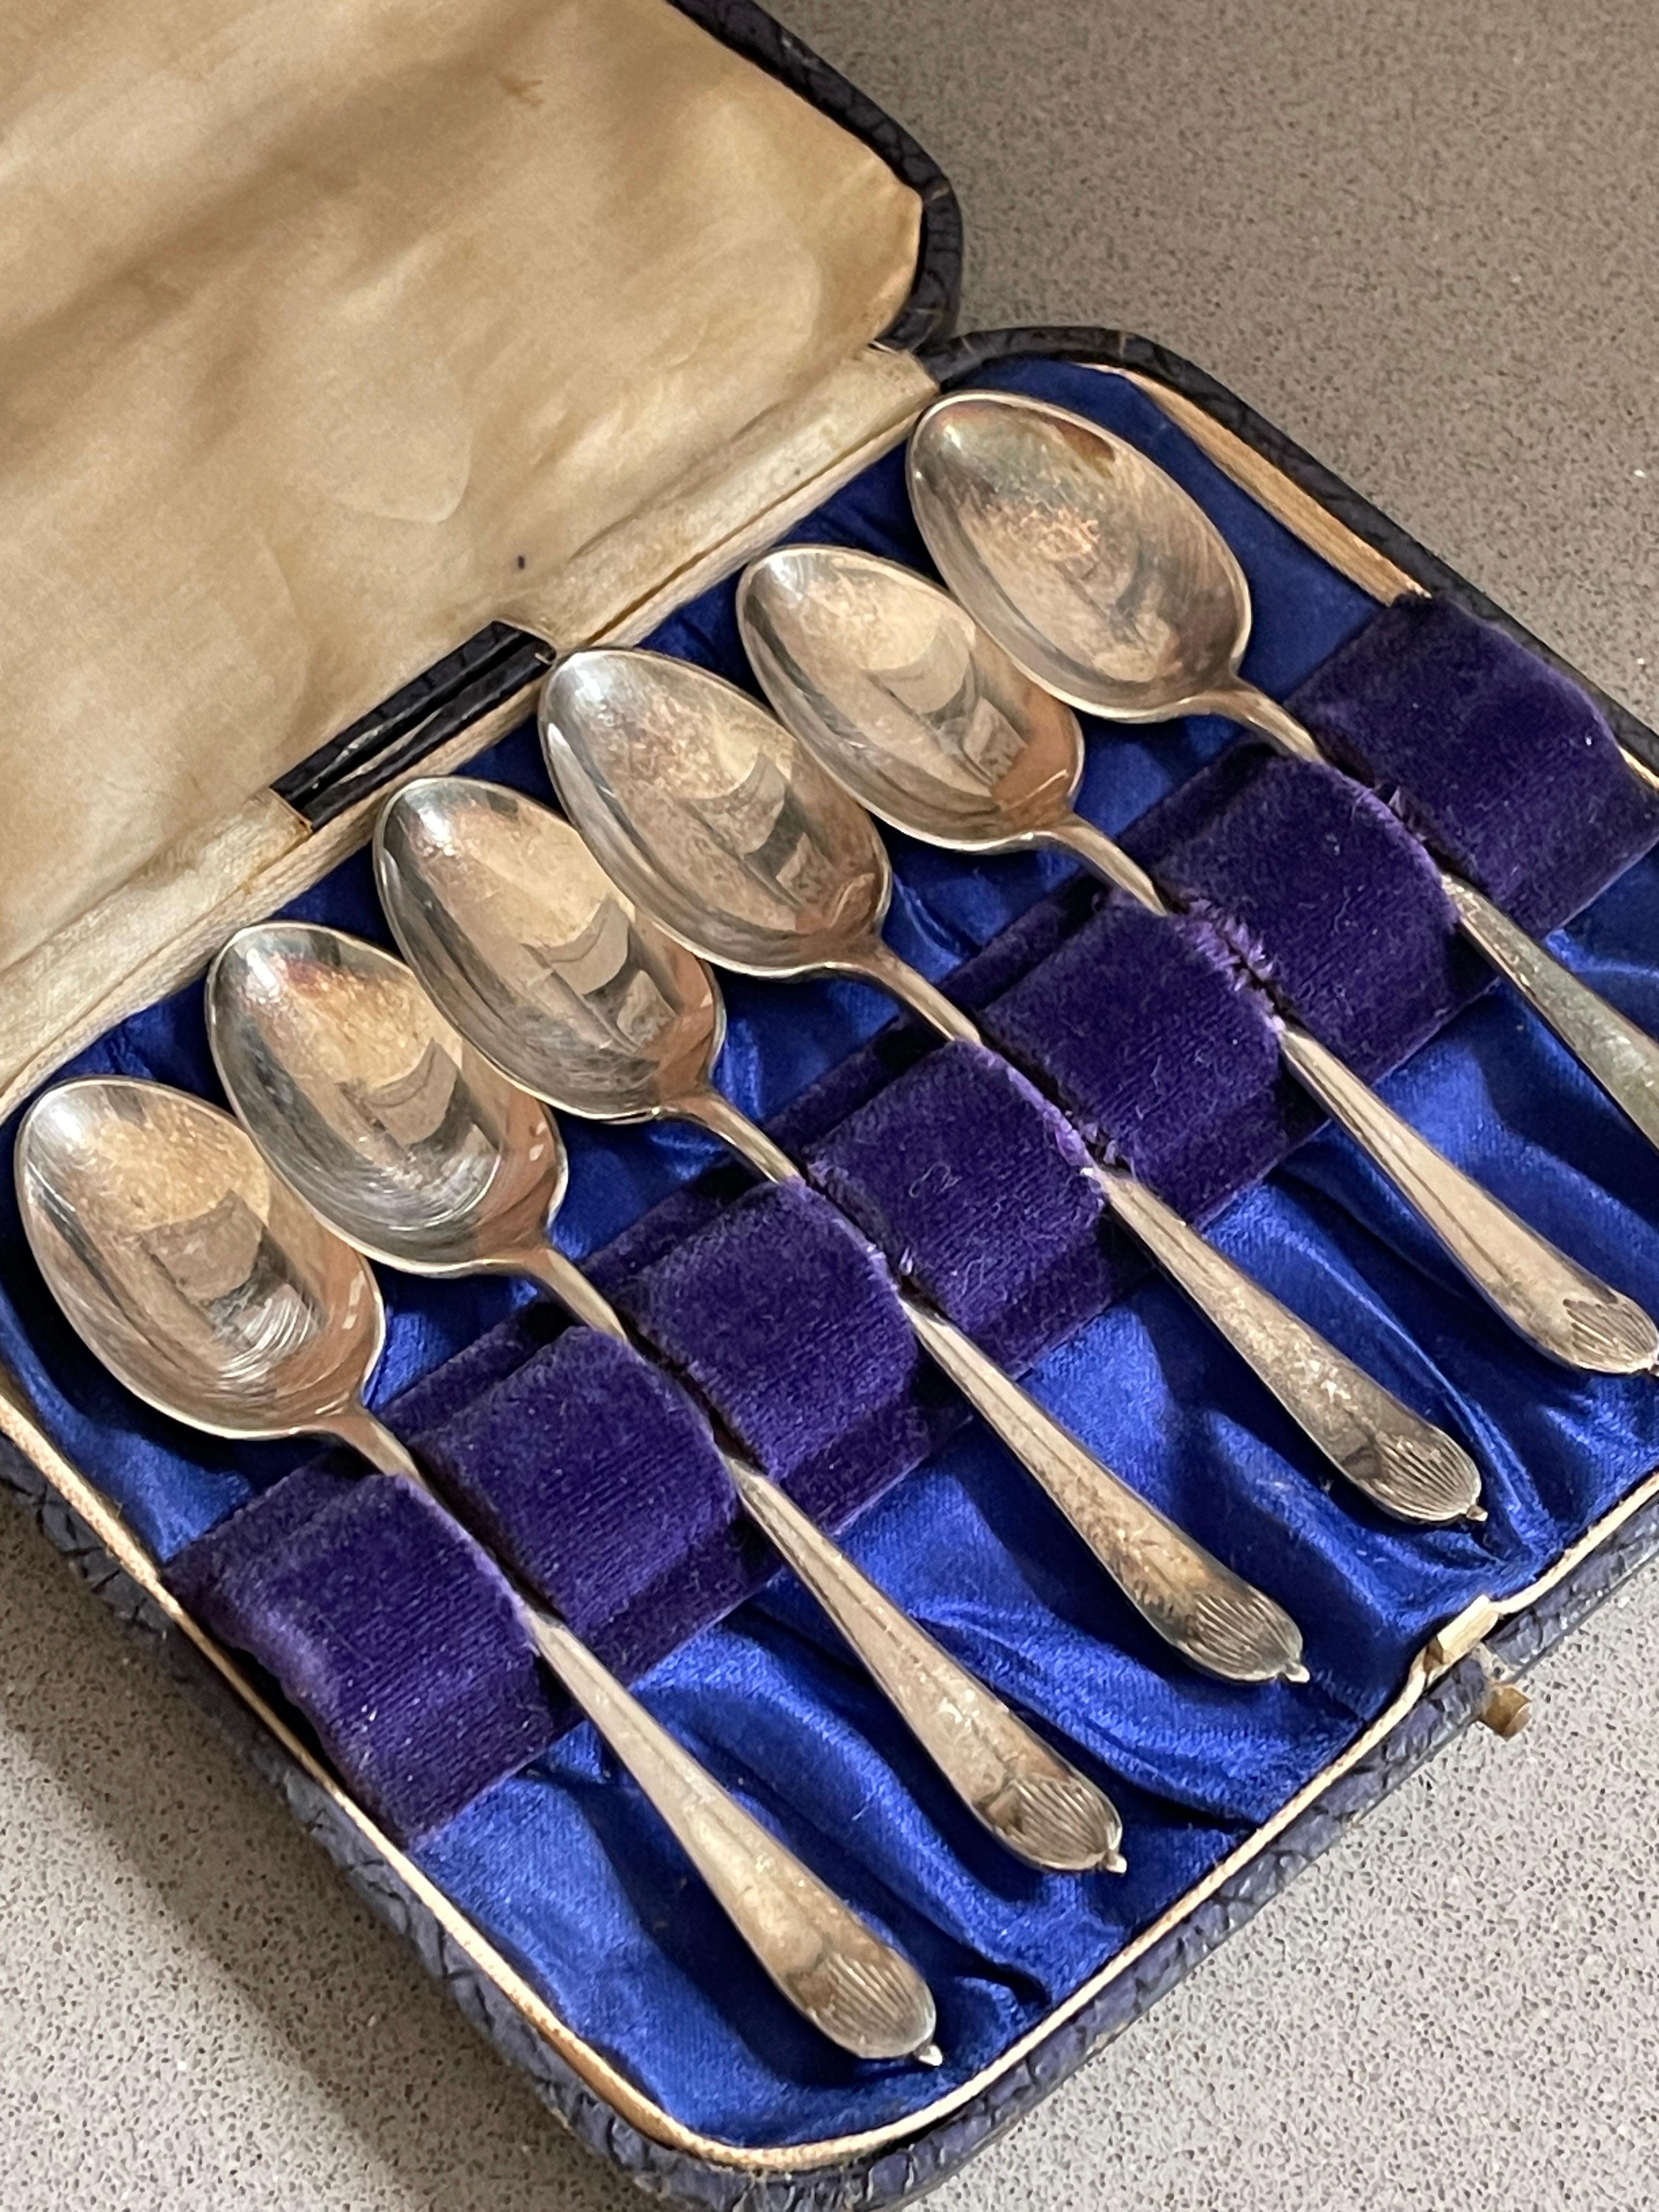 Exclusive Tea COFFEE SPOONS, 6 pcs. Sterling Silver & Box, Antique Silver Spoons In Excellent Condition For Sale In Hampshire, GB